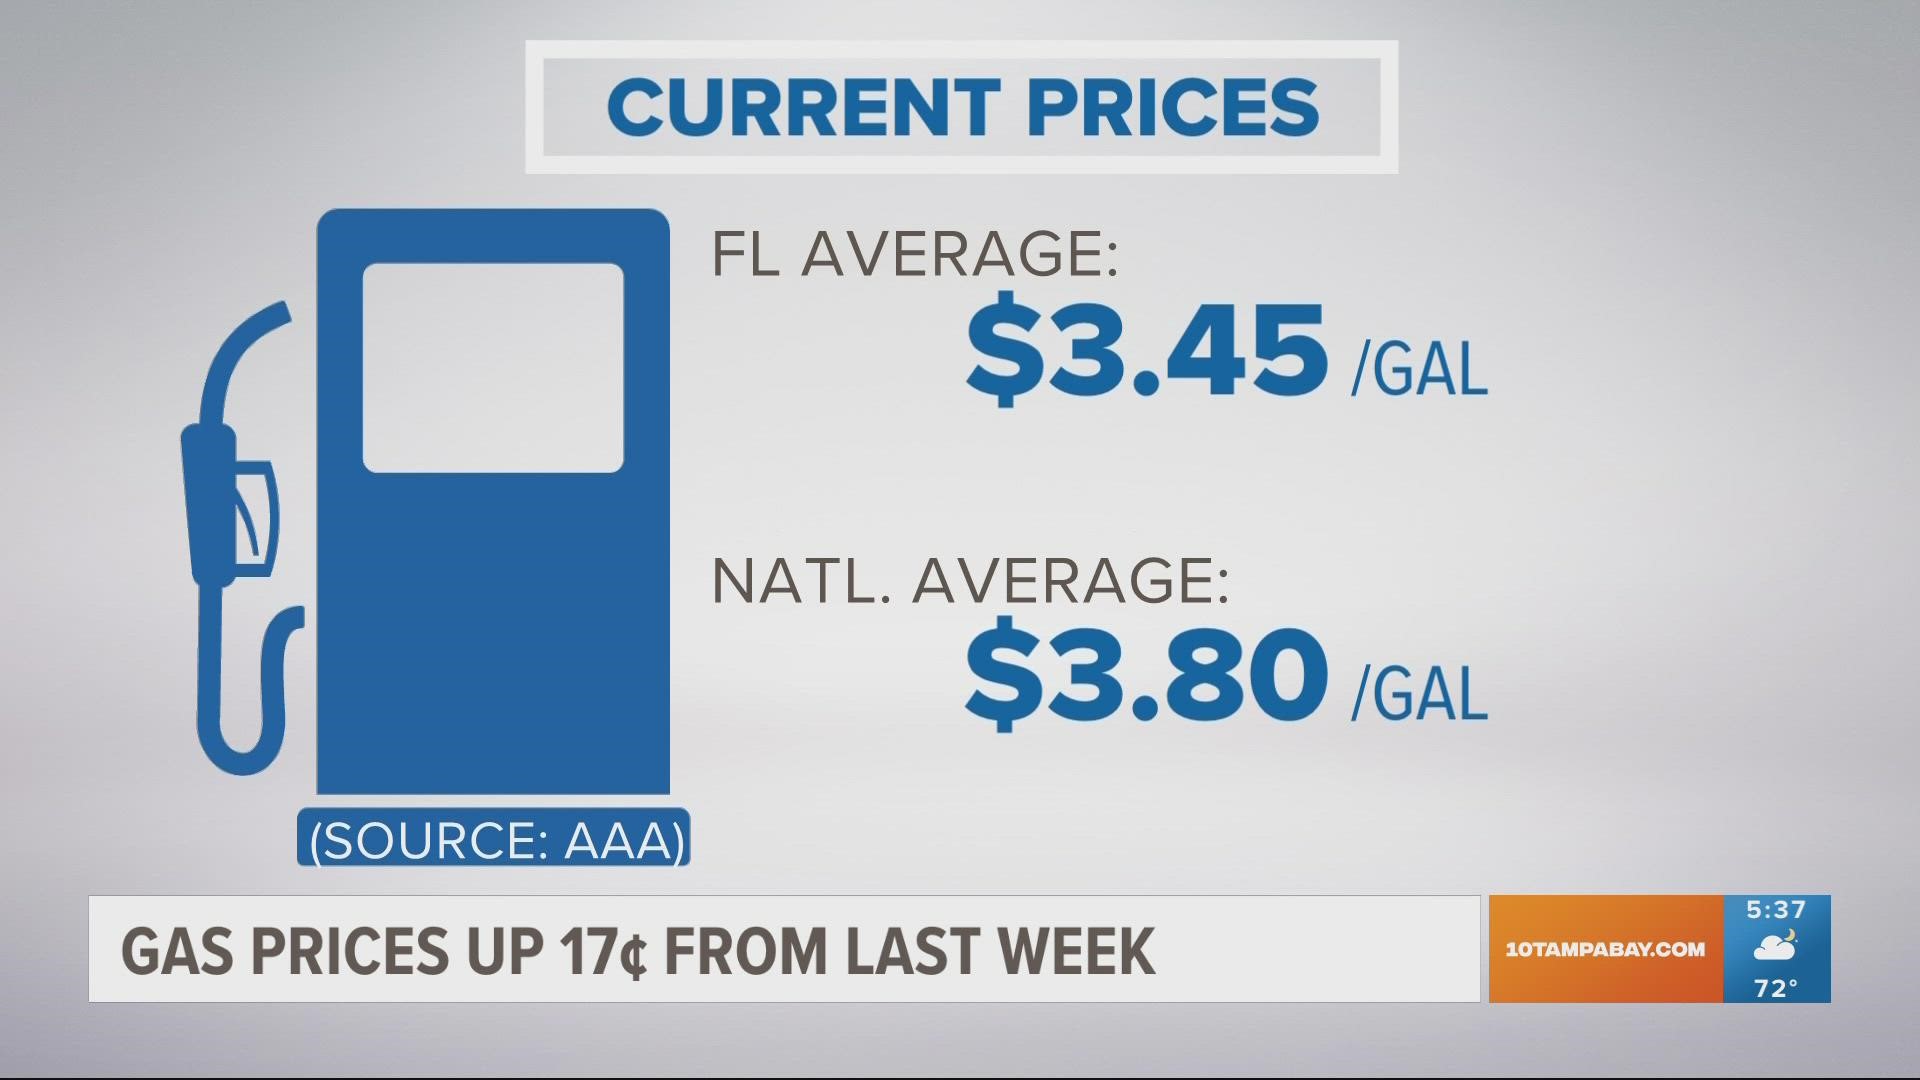 Floridians are paying around $3.45 per gallon on average.